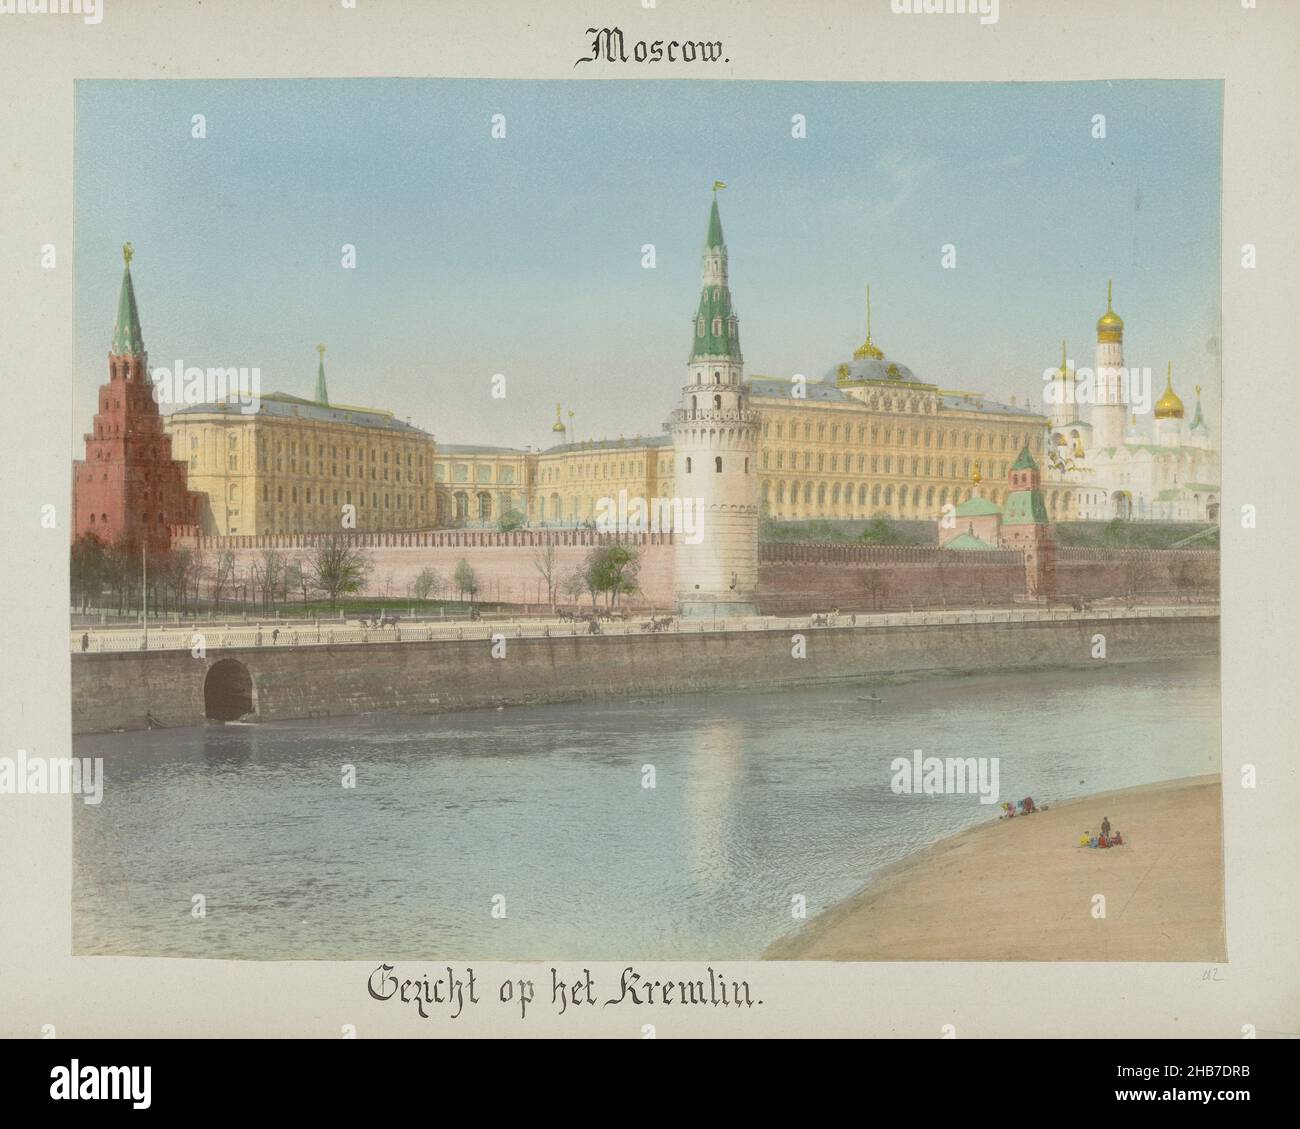 View of the Kremlin and Moskva River, Moscow, View of the Kremlin. (title on object), A colored photograph of the Kremlin seen from the other side of the bridge over the Moskva., anonymous (possibly), Henry Pauw van Wieldrecht,  1898, paper, albumen print, height 220 mm × width 275 mmheight 259 mm × width 365 mm Stock Photo